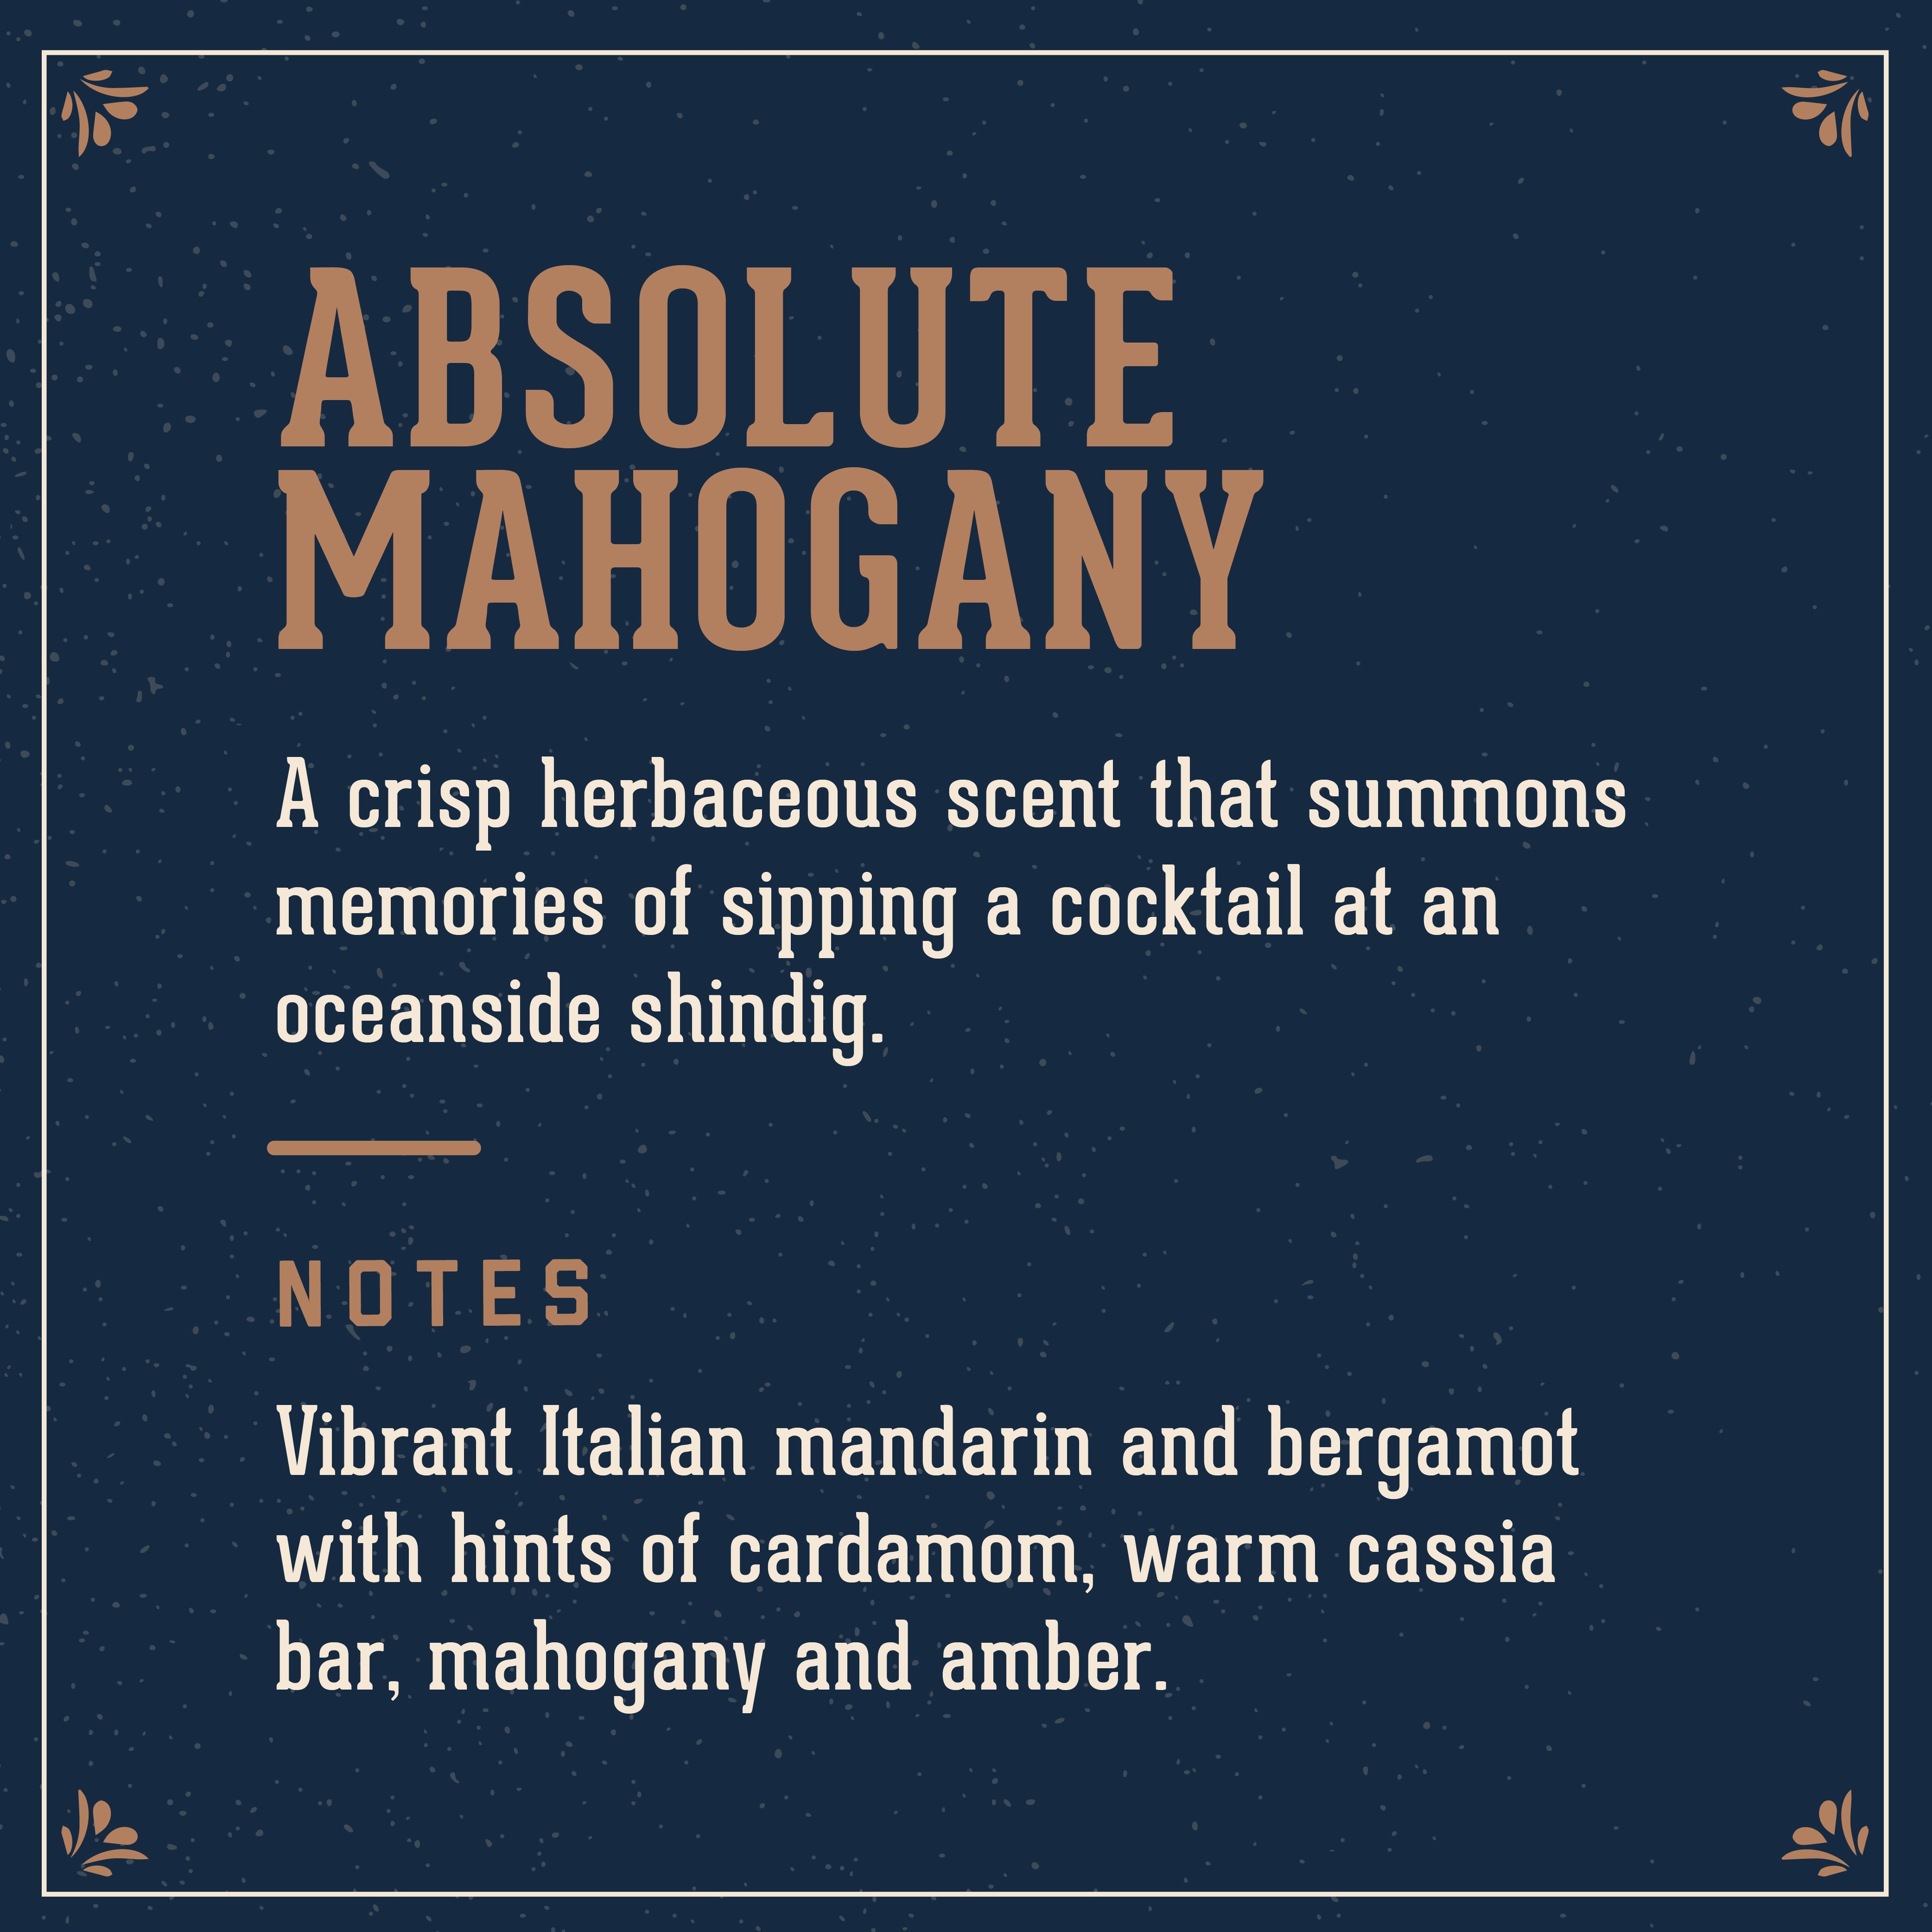 Absolute Mahogany Scent: A crisp herbaceous scent that summons memories of sipping a cocktail at an oceanside shindig. With notes of vibrant Italian mandarin and bergamot with hints of cardamom, warm cassia bar, mahogany and amber.